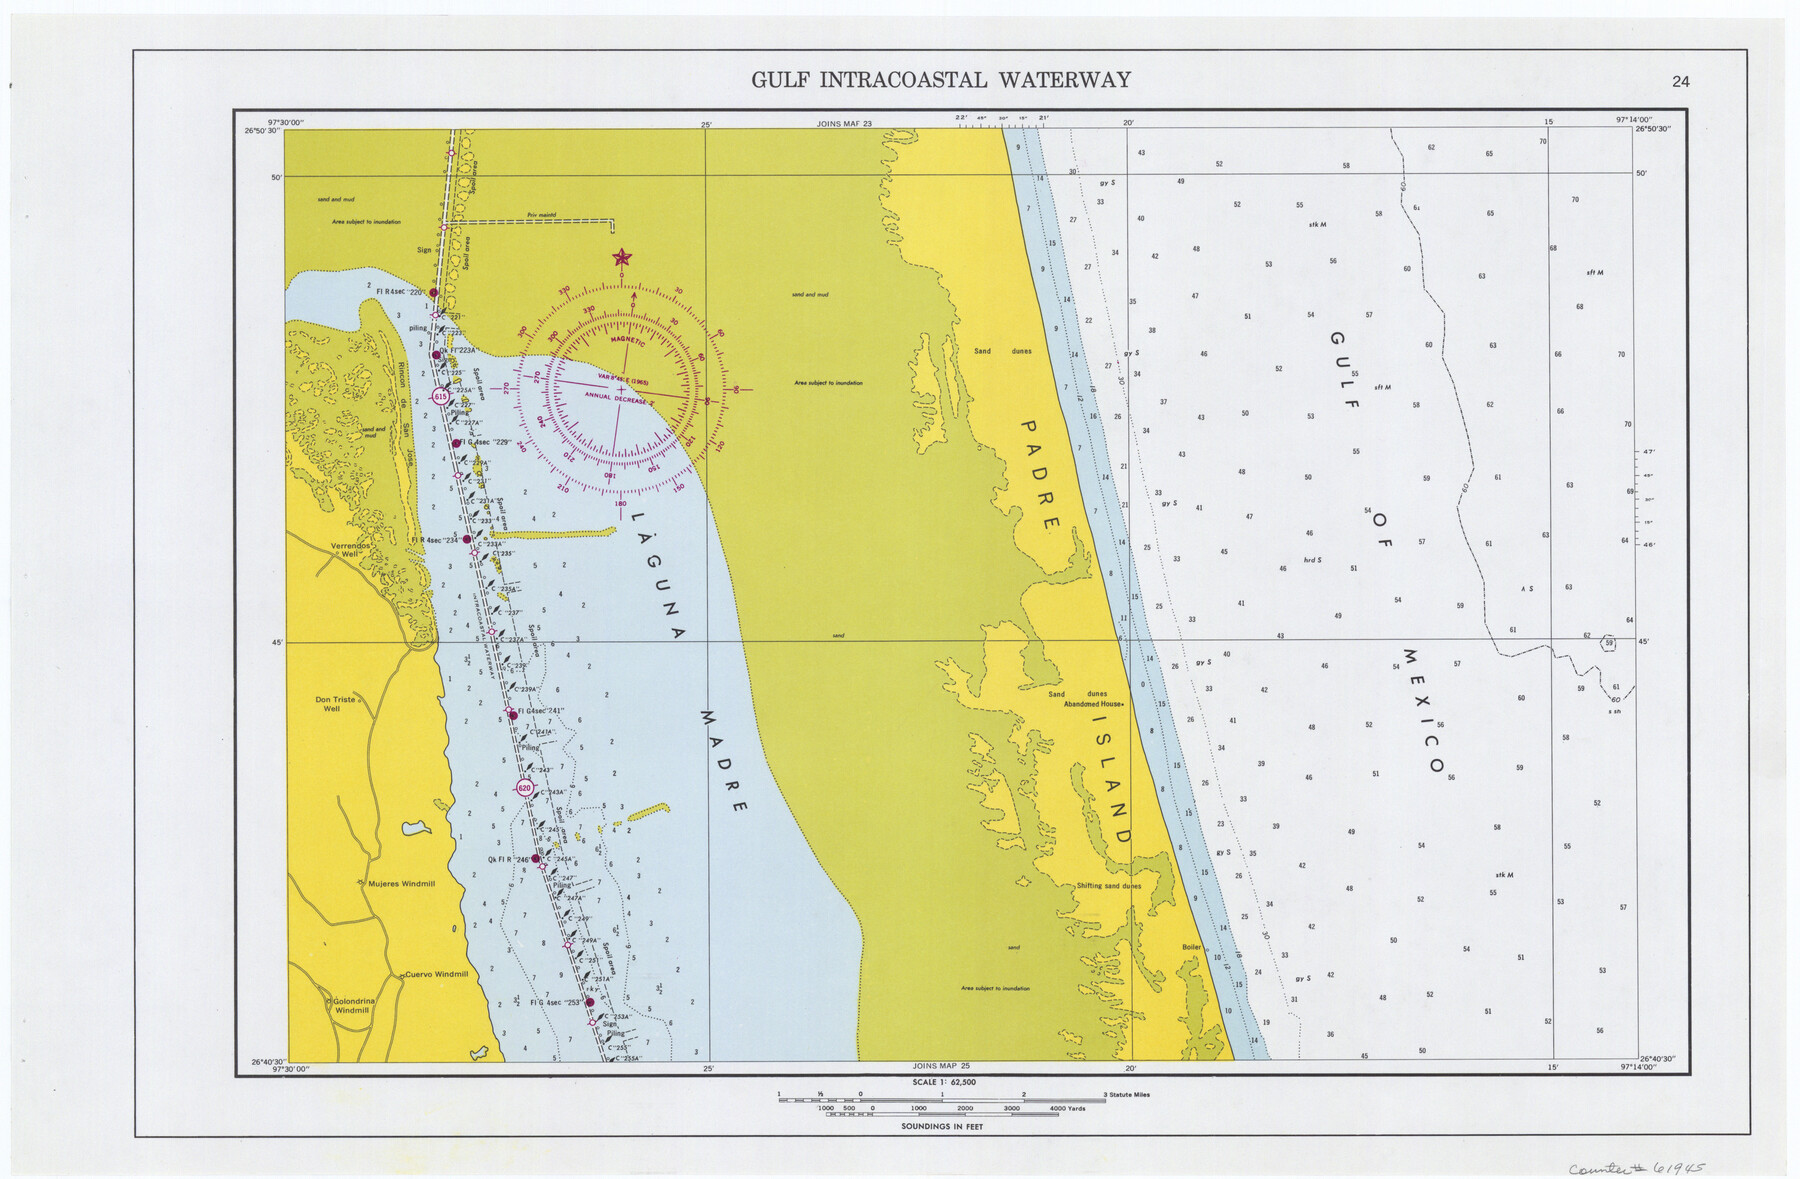 Maps Of Gulf Intracoastal Waterway Texas Sabine River To The Rio Grande And Connecting 4070